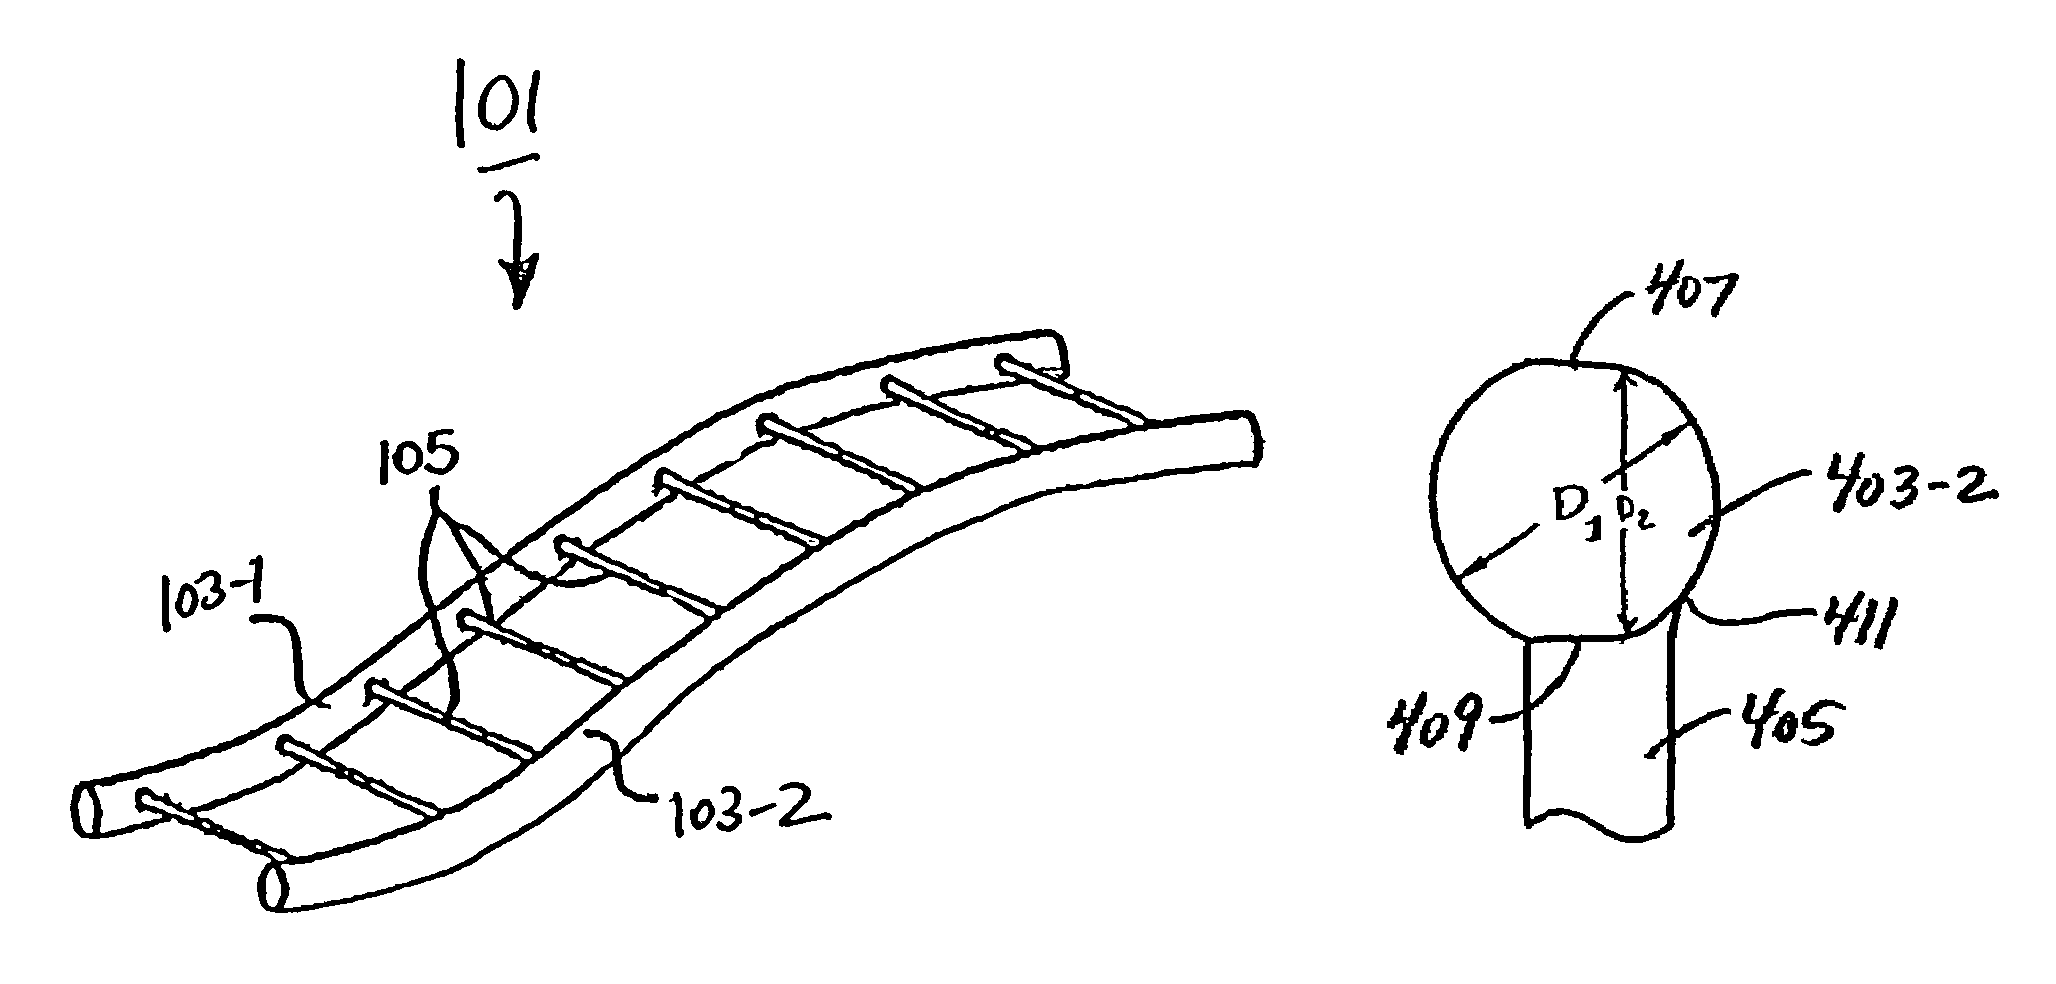 Continuously connected fastener stock and method of manufacturing the same